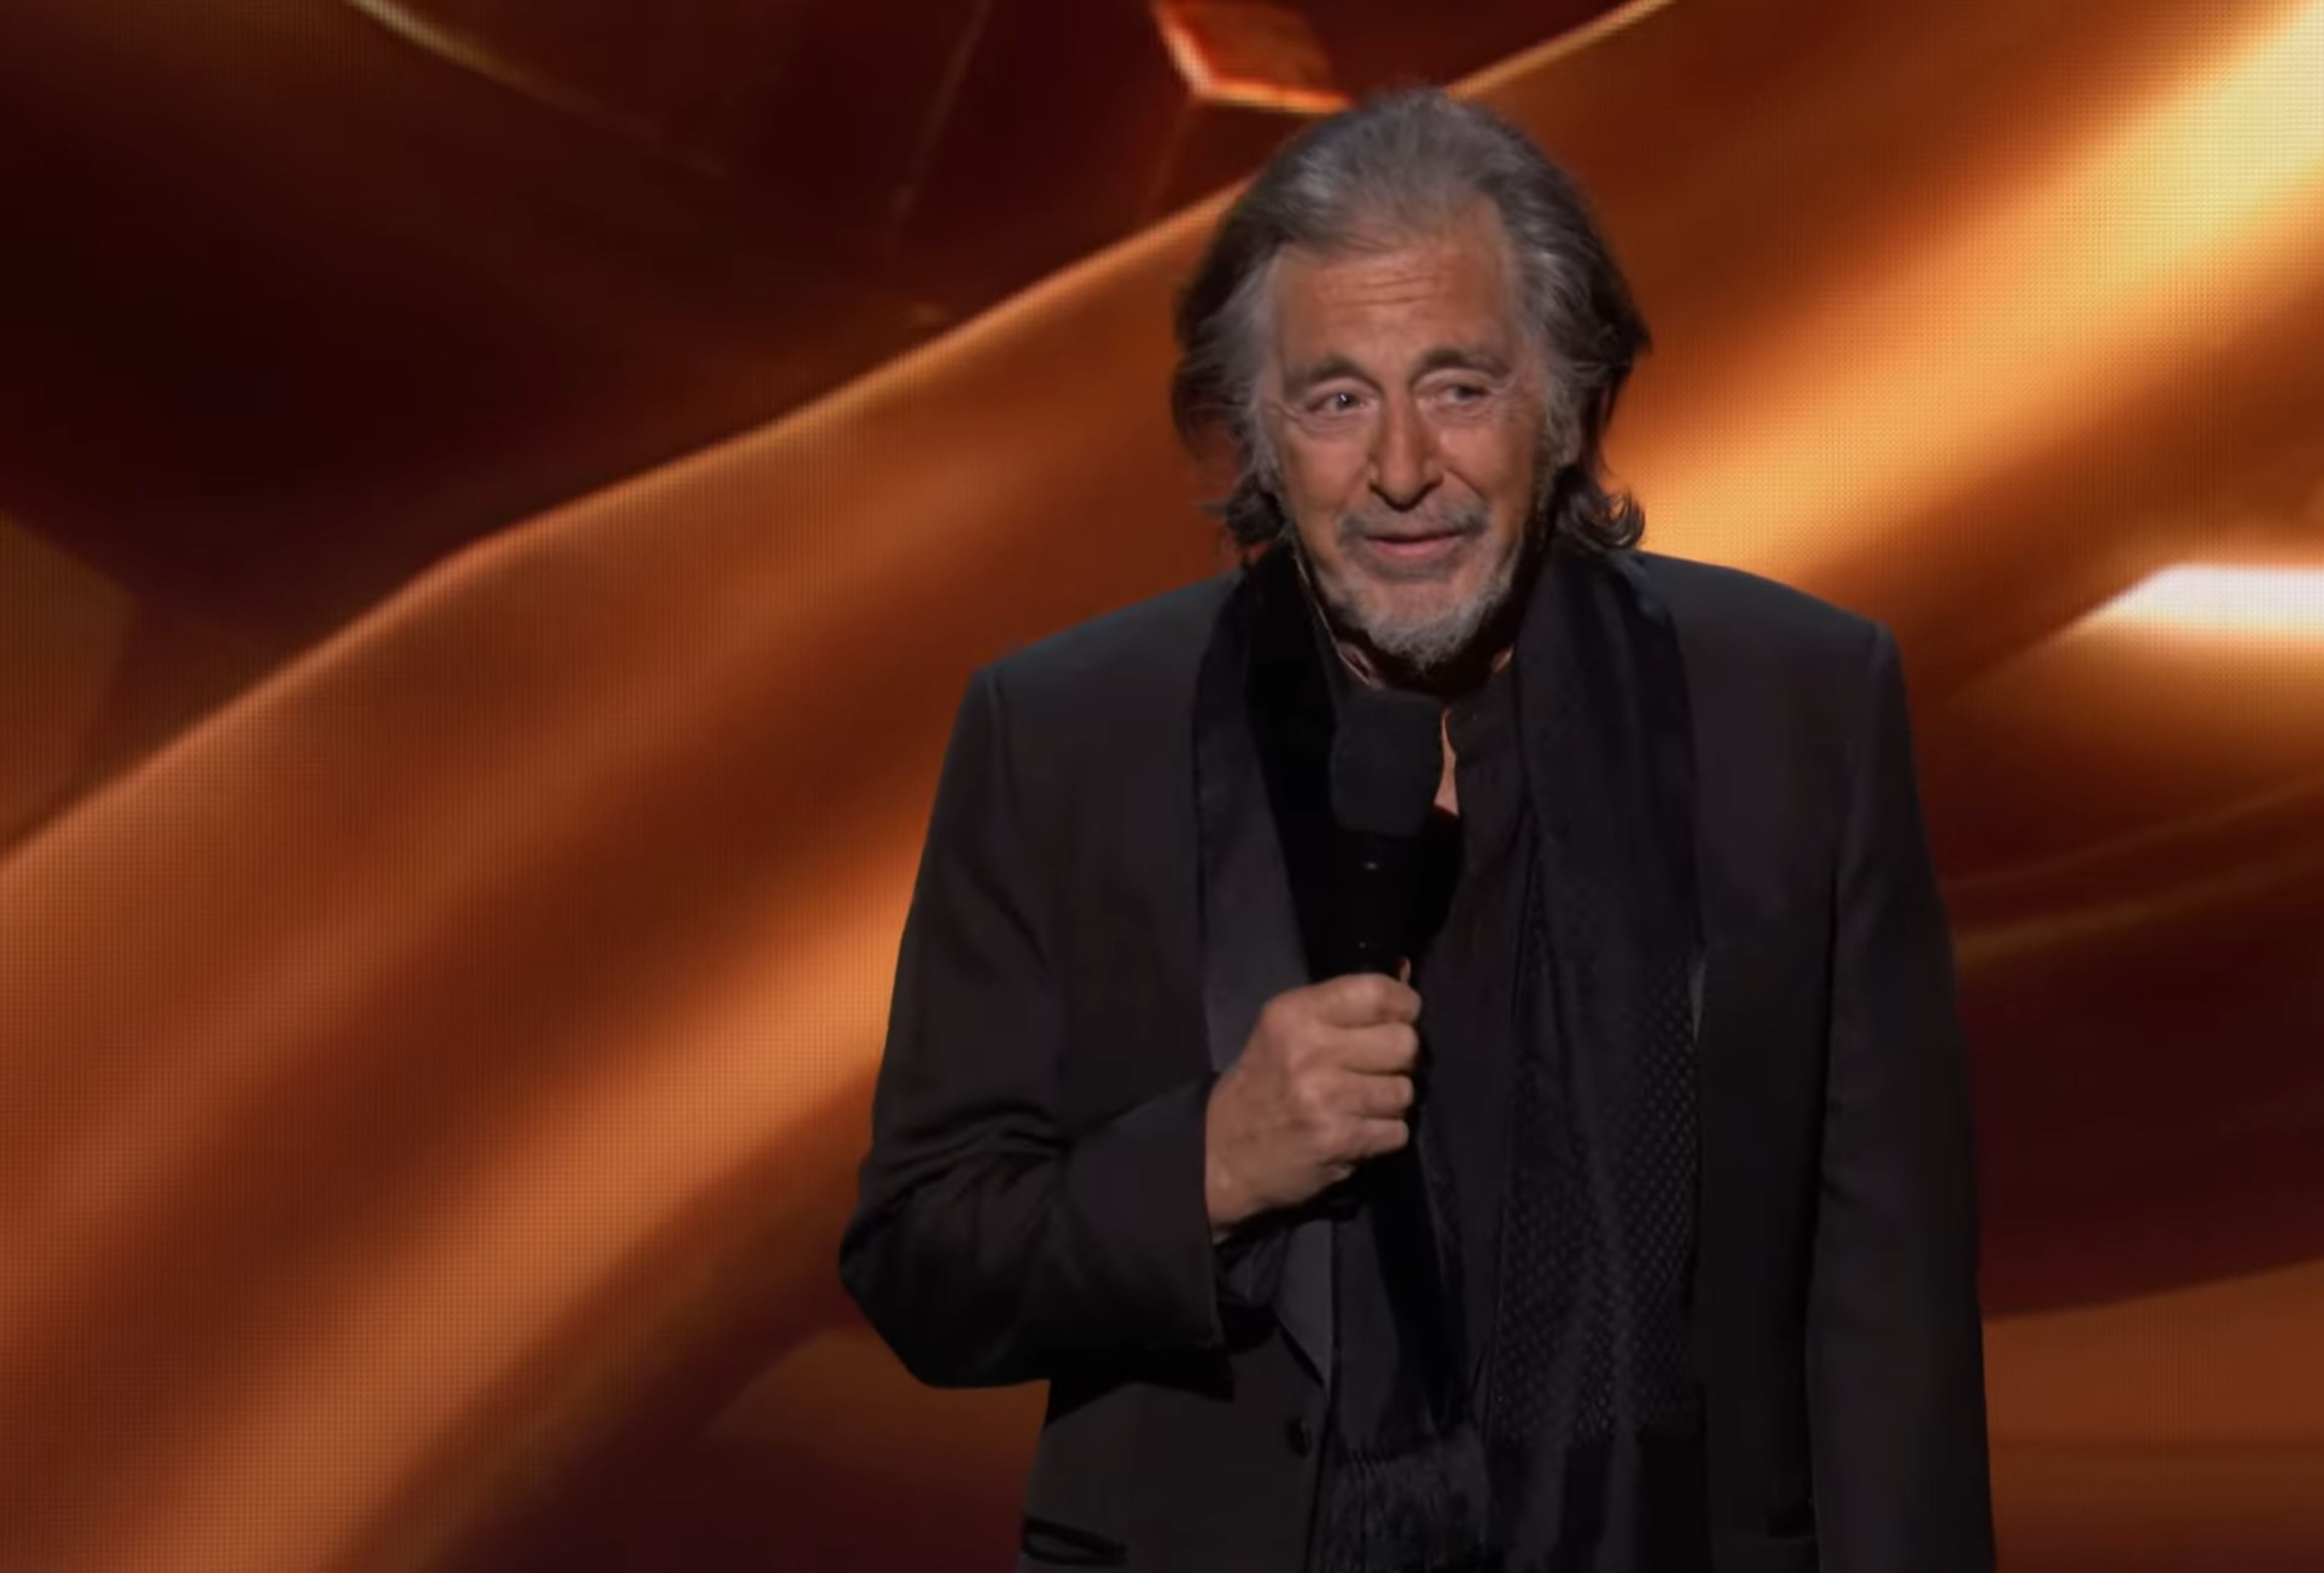 Al Pacino, Bill Clinton, and The Game Awards 2022's Strangest